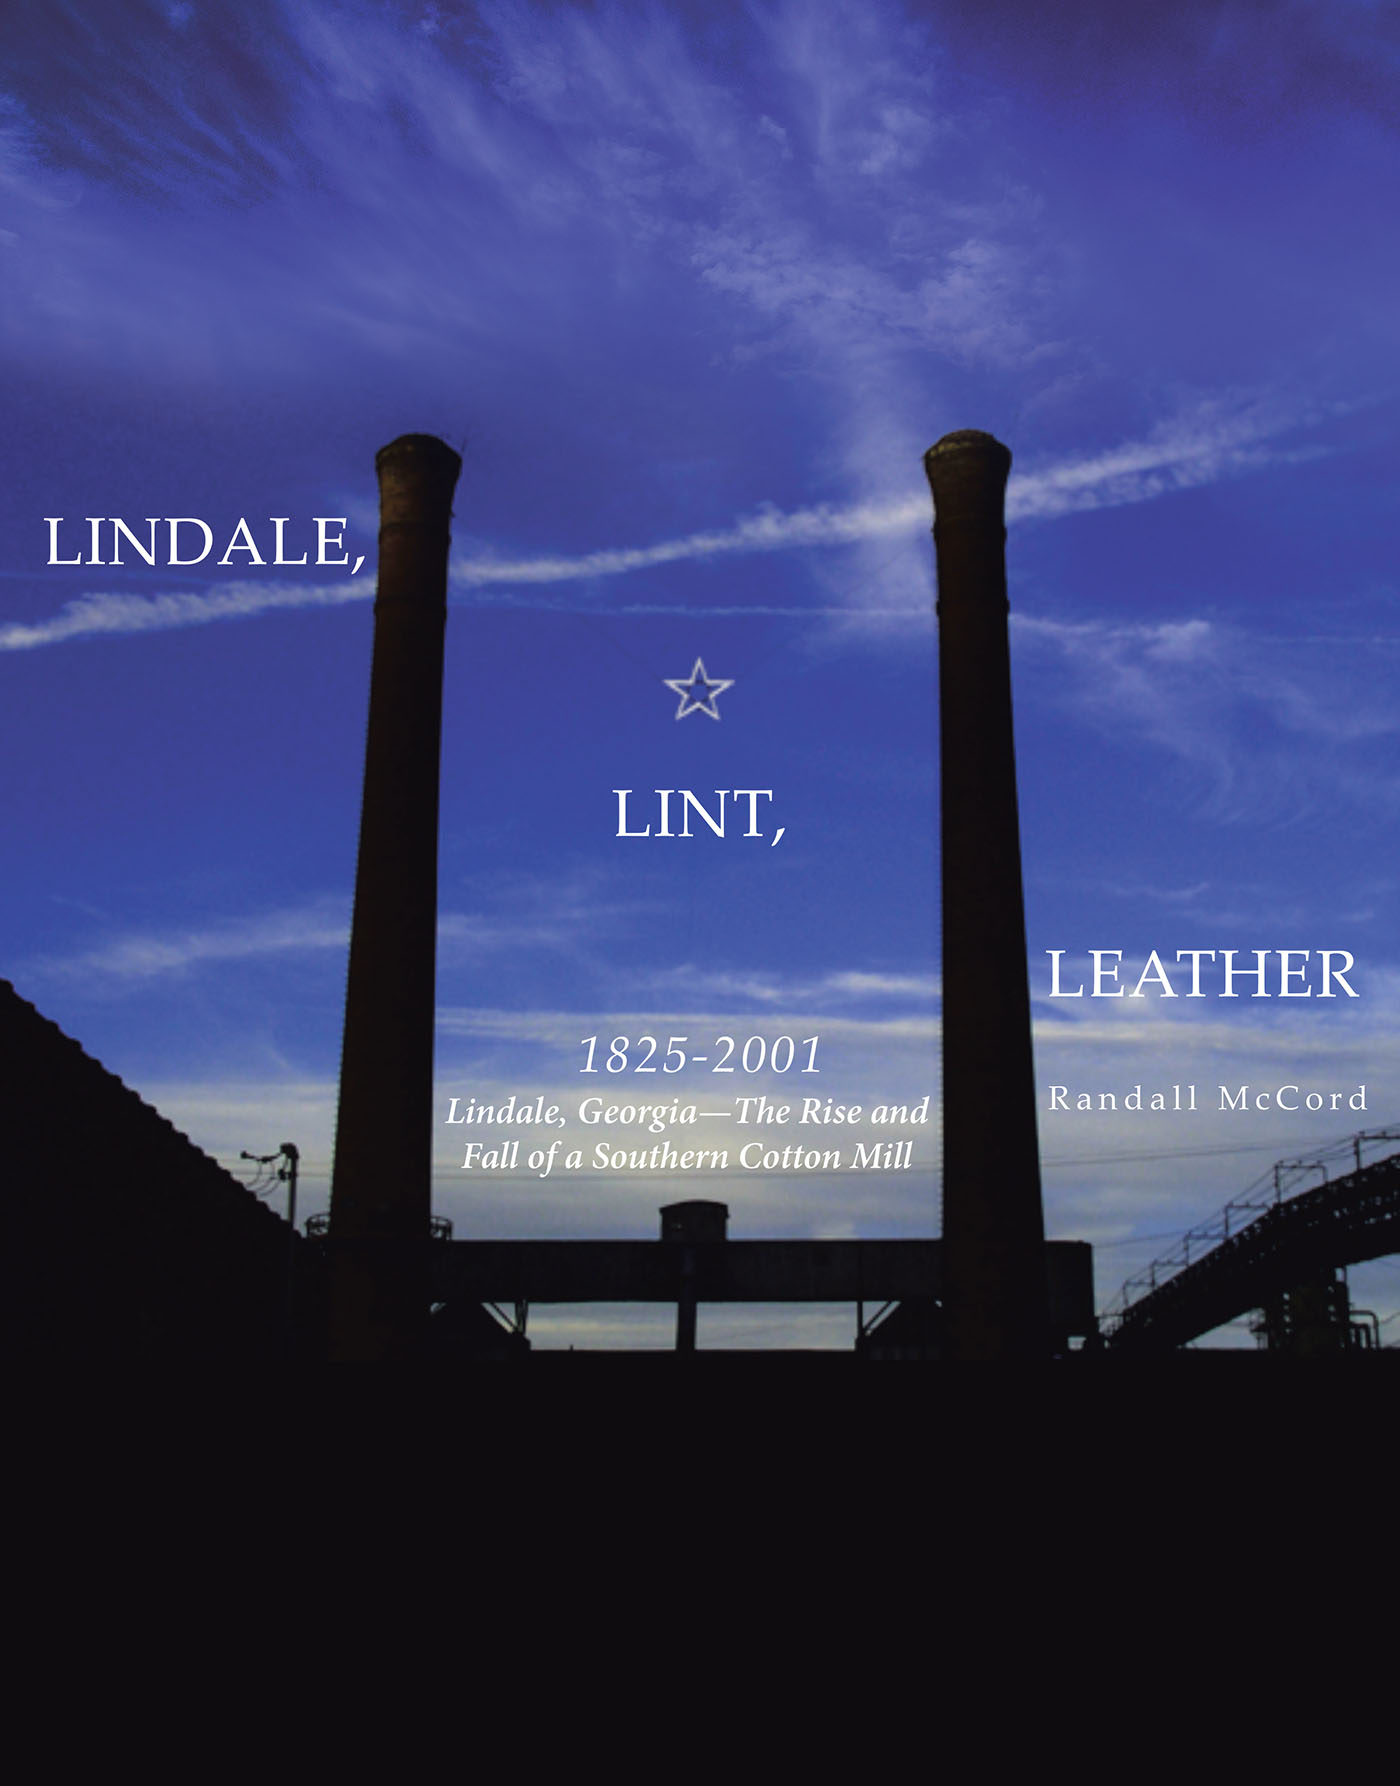 Author Randall McCord’s New Book “Lindale, Lint and Leather 1825-2001: Lindale, Georgia—The Rise and Fall of a Southern Cotton Mill” is the Author’s Third Published Work